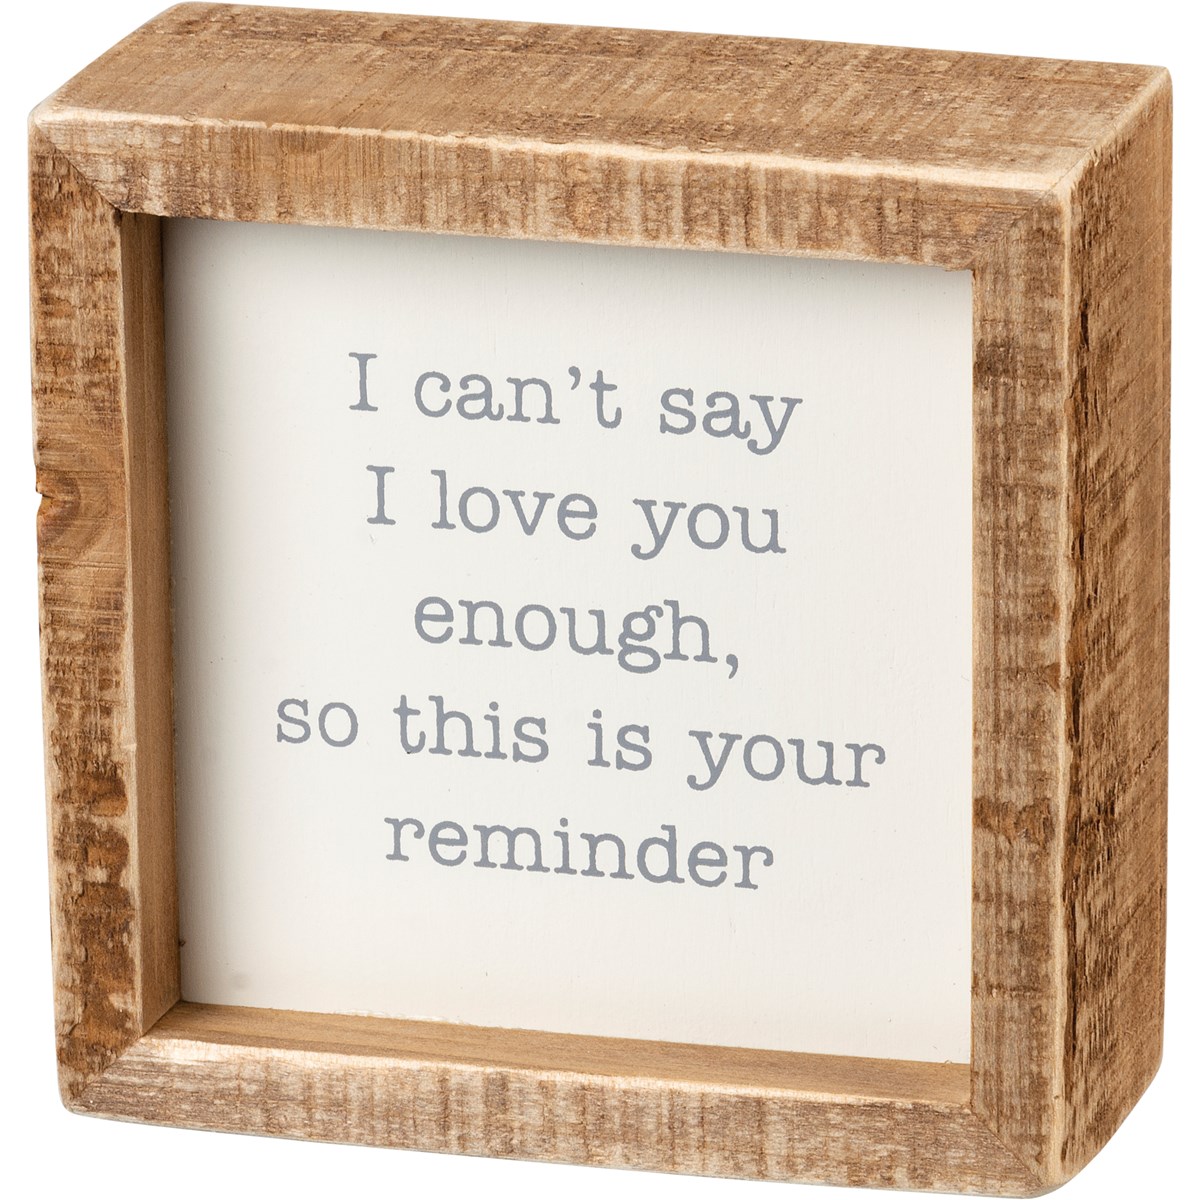 I Can't Say I Love You Enough Inset Box Sign - Wood